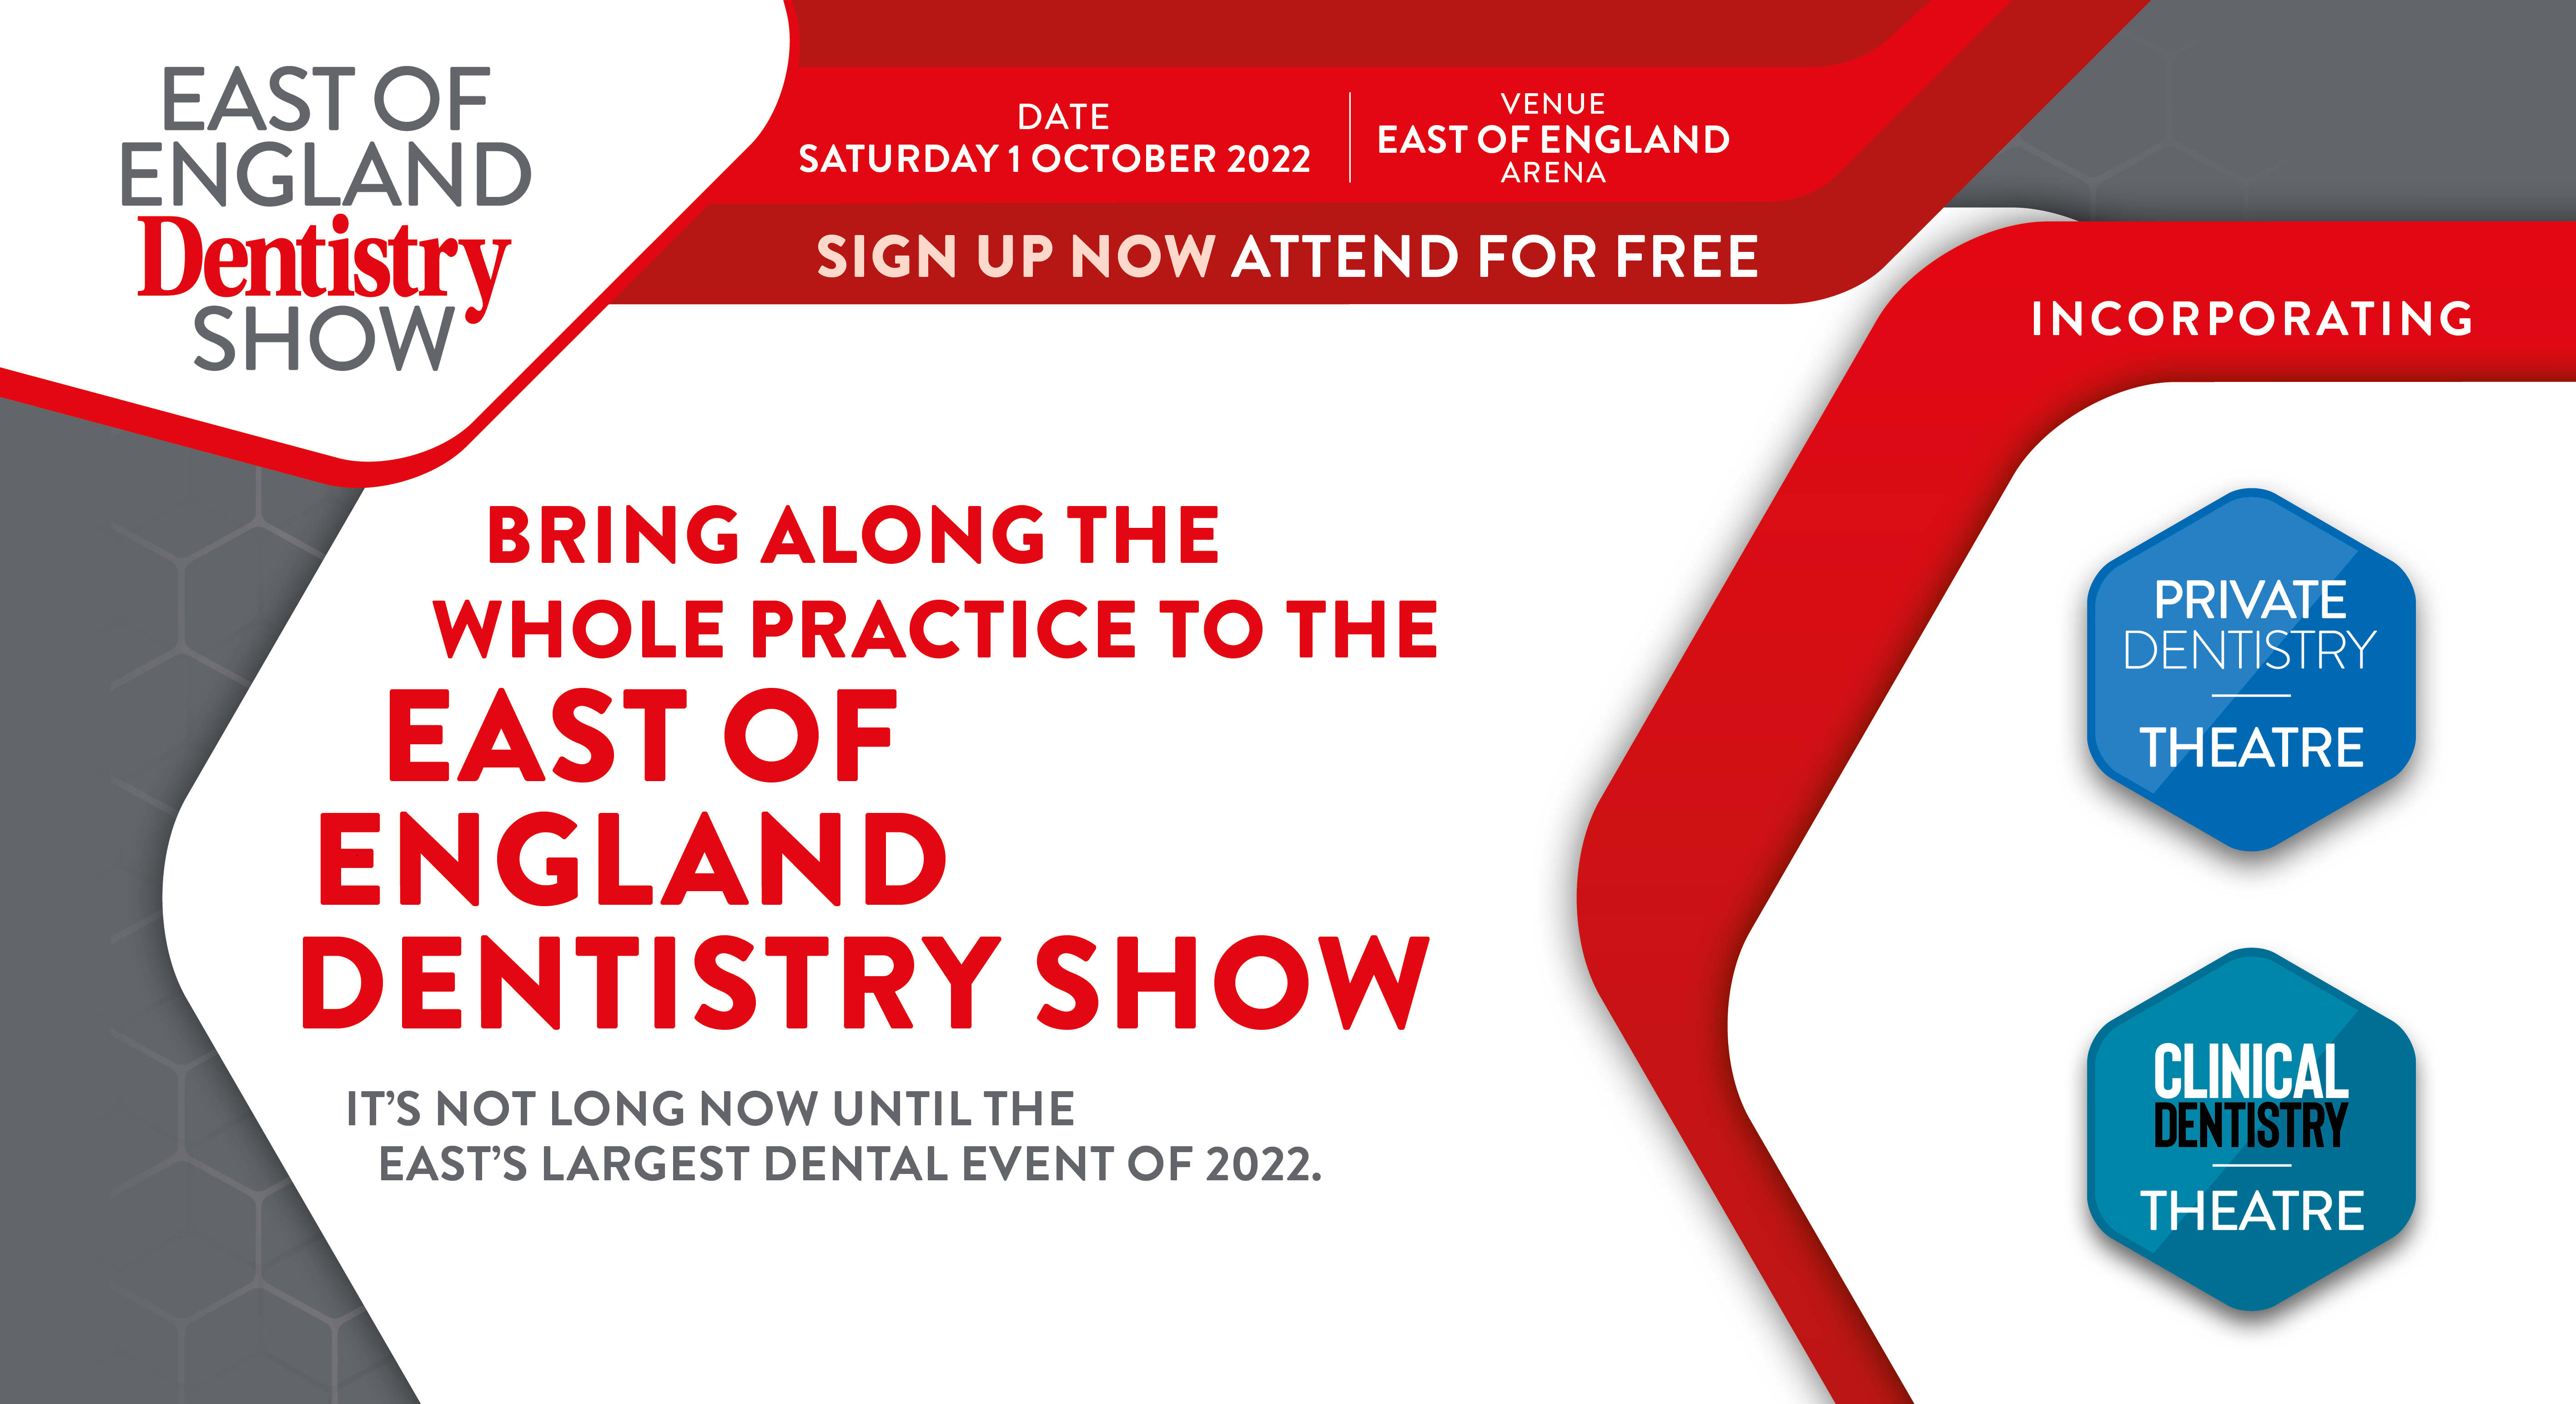 A brand new dental show is heading to the East of England next month – register now for free to save your spot!